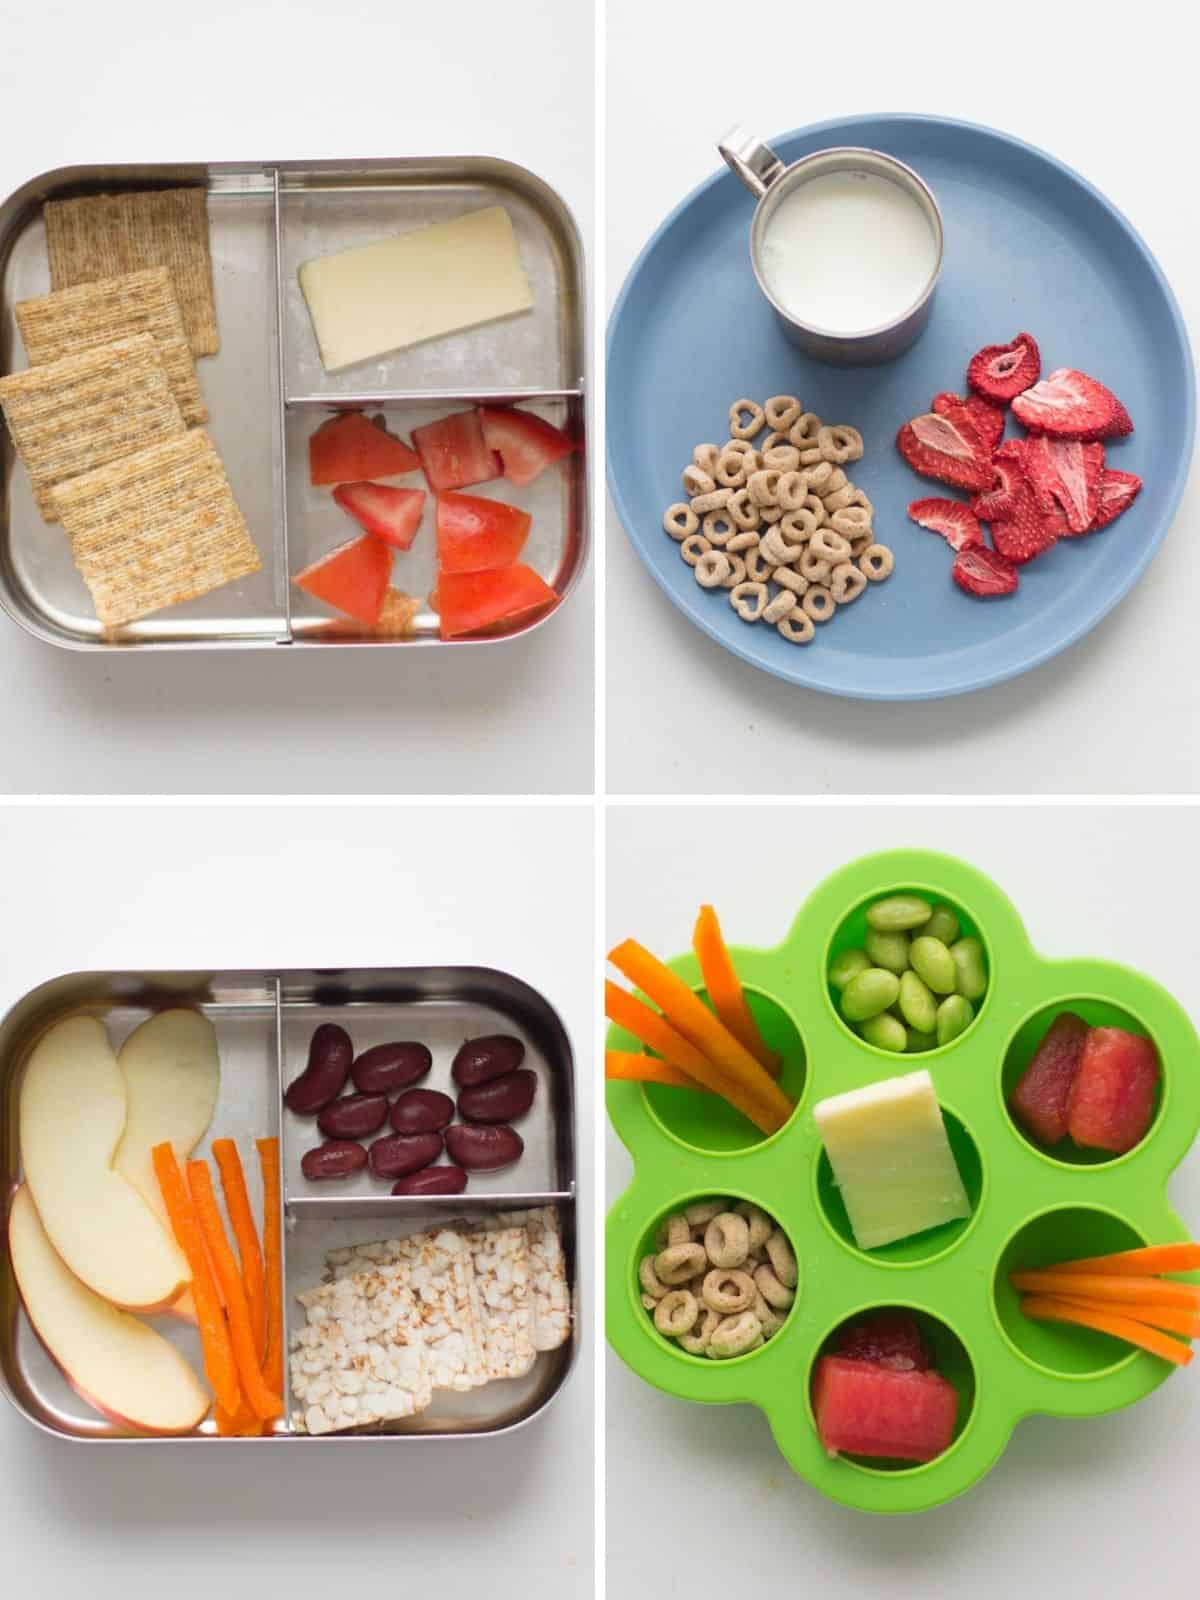 A four image collage of no cooking required snack ideas.